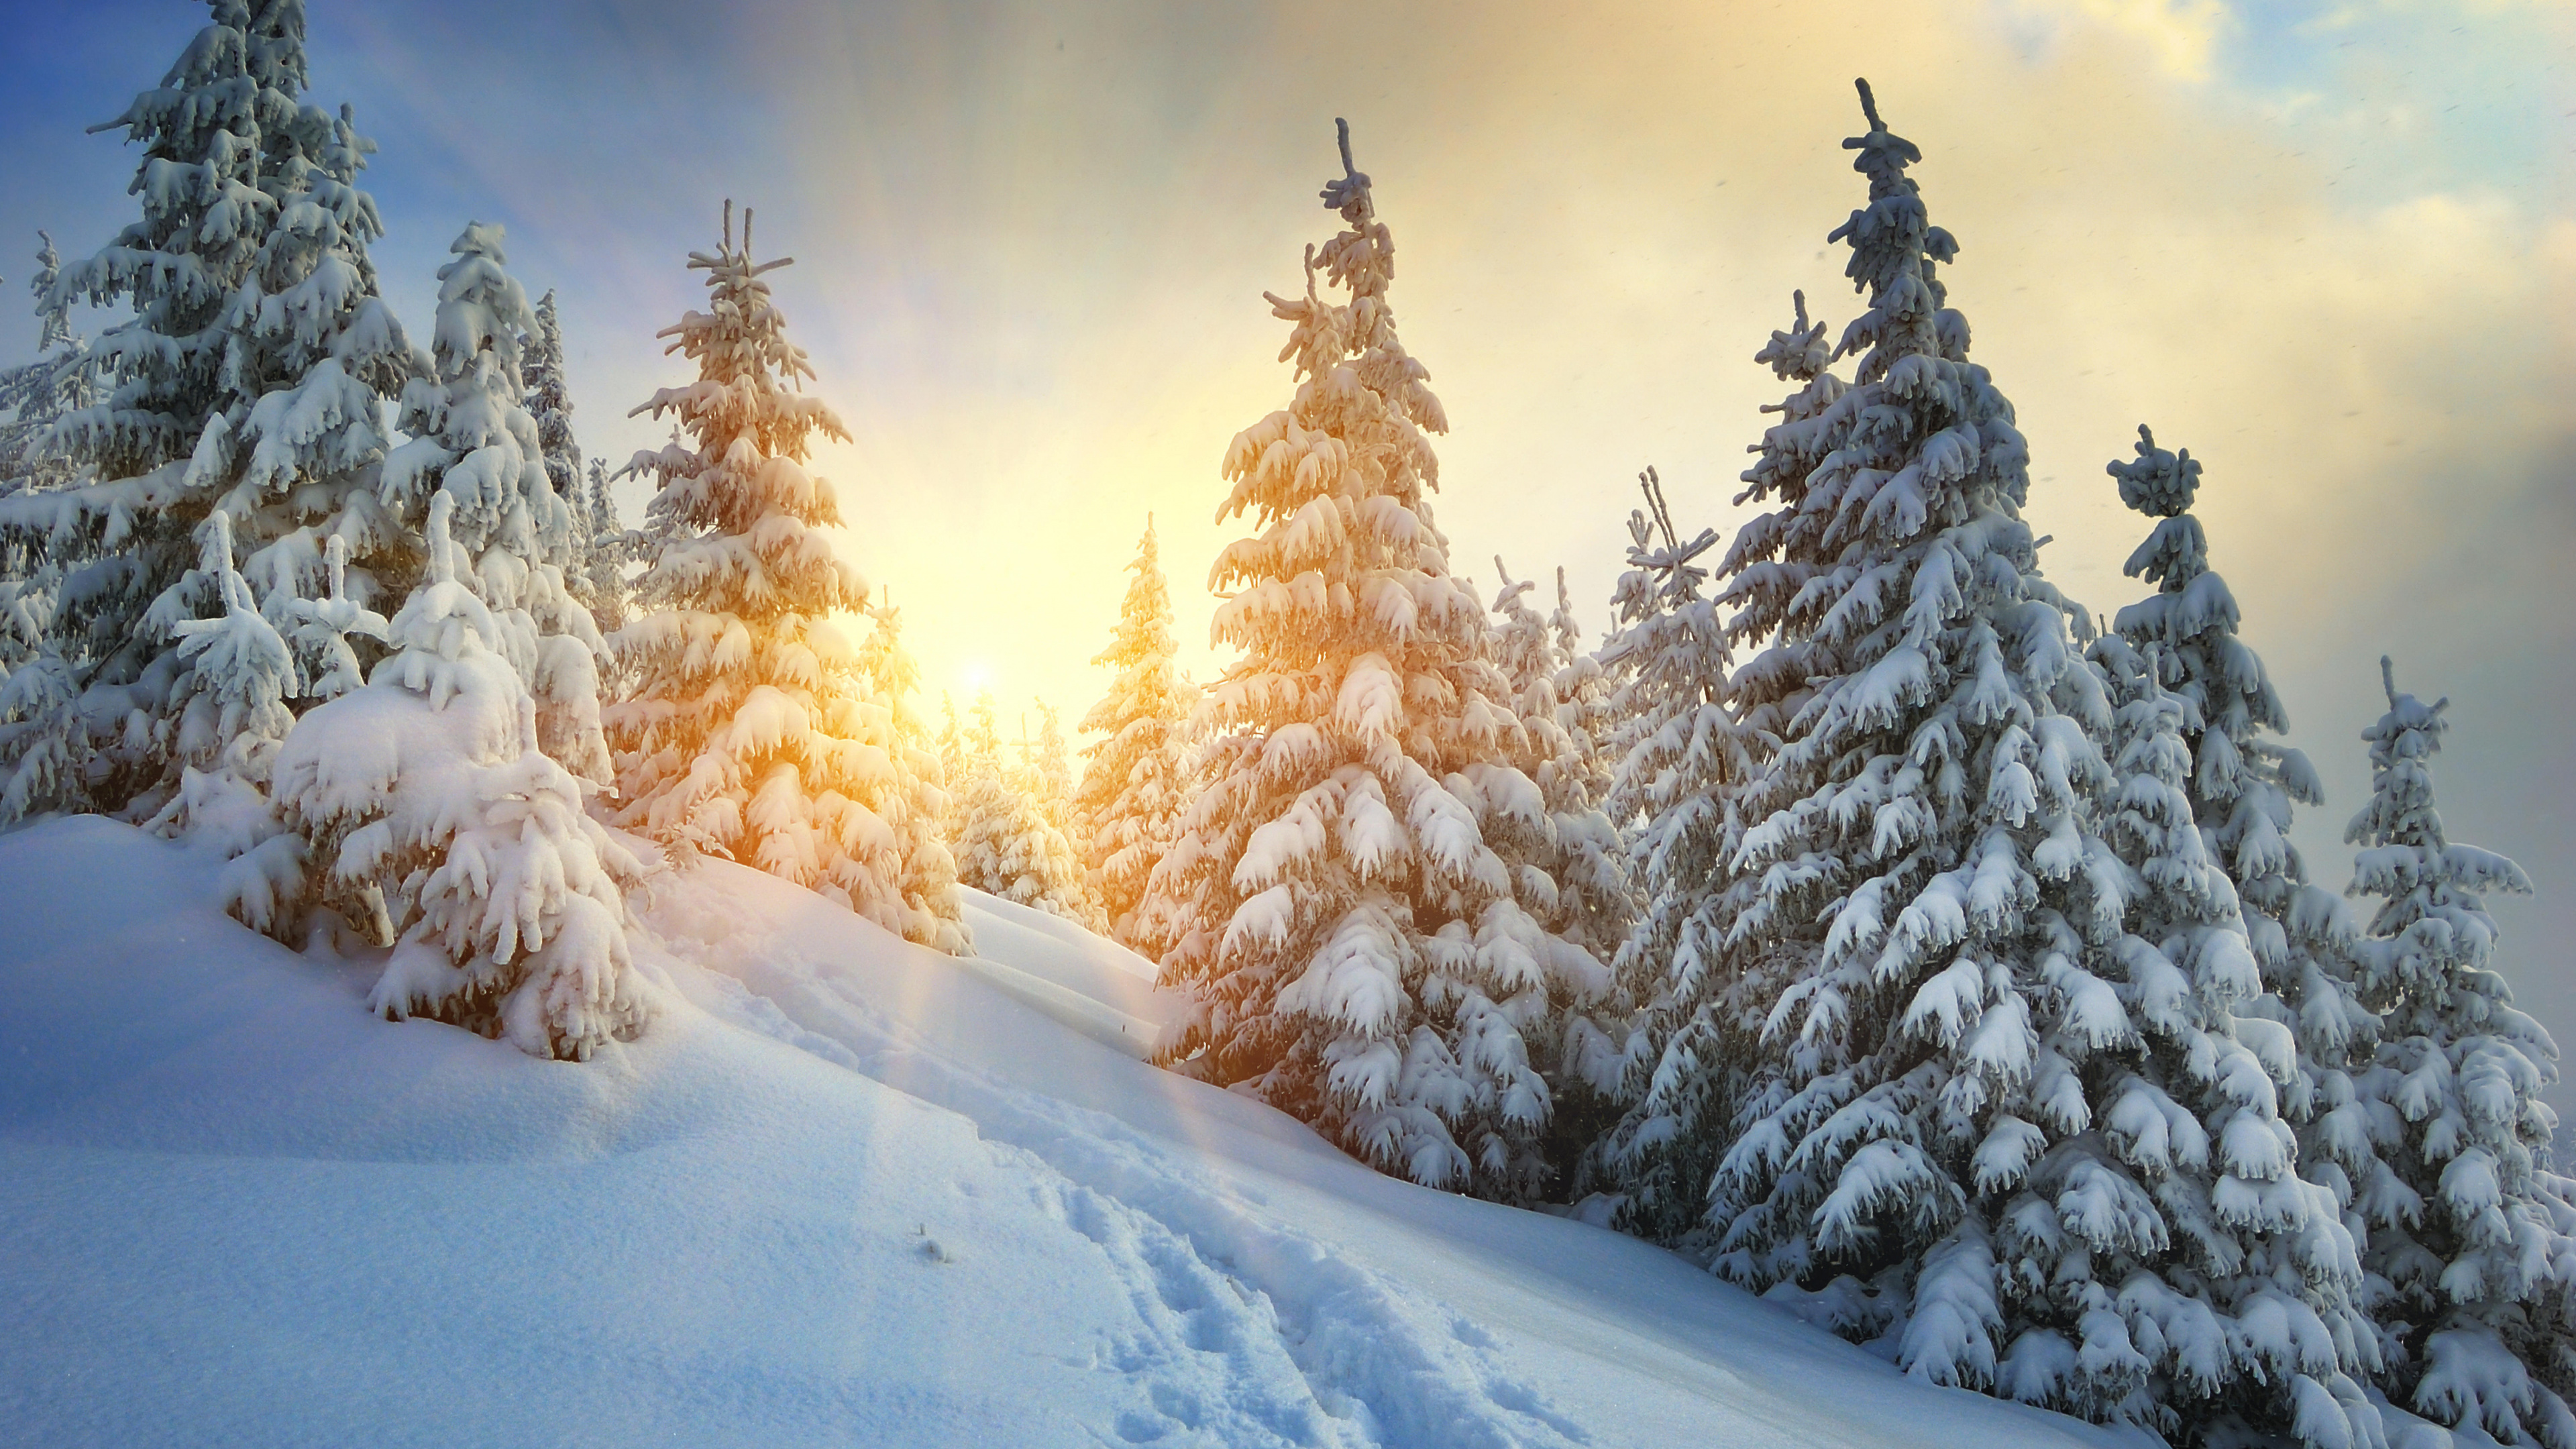 Snow Covered Pine Trees During Daytime. Wallpaper in 3840x2160 Resolution